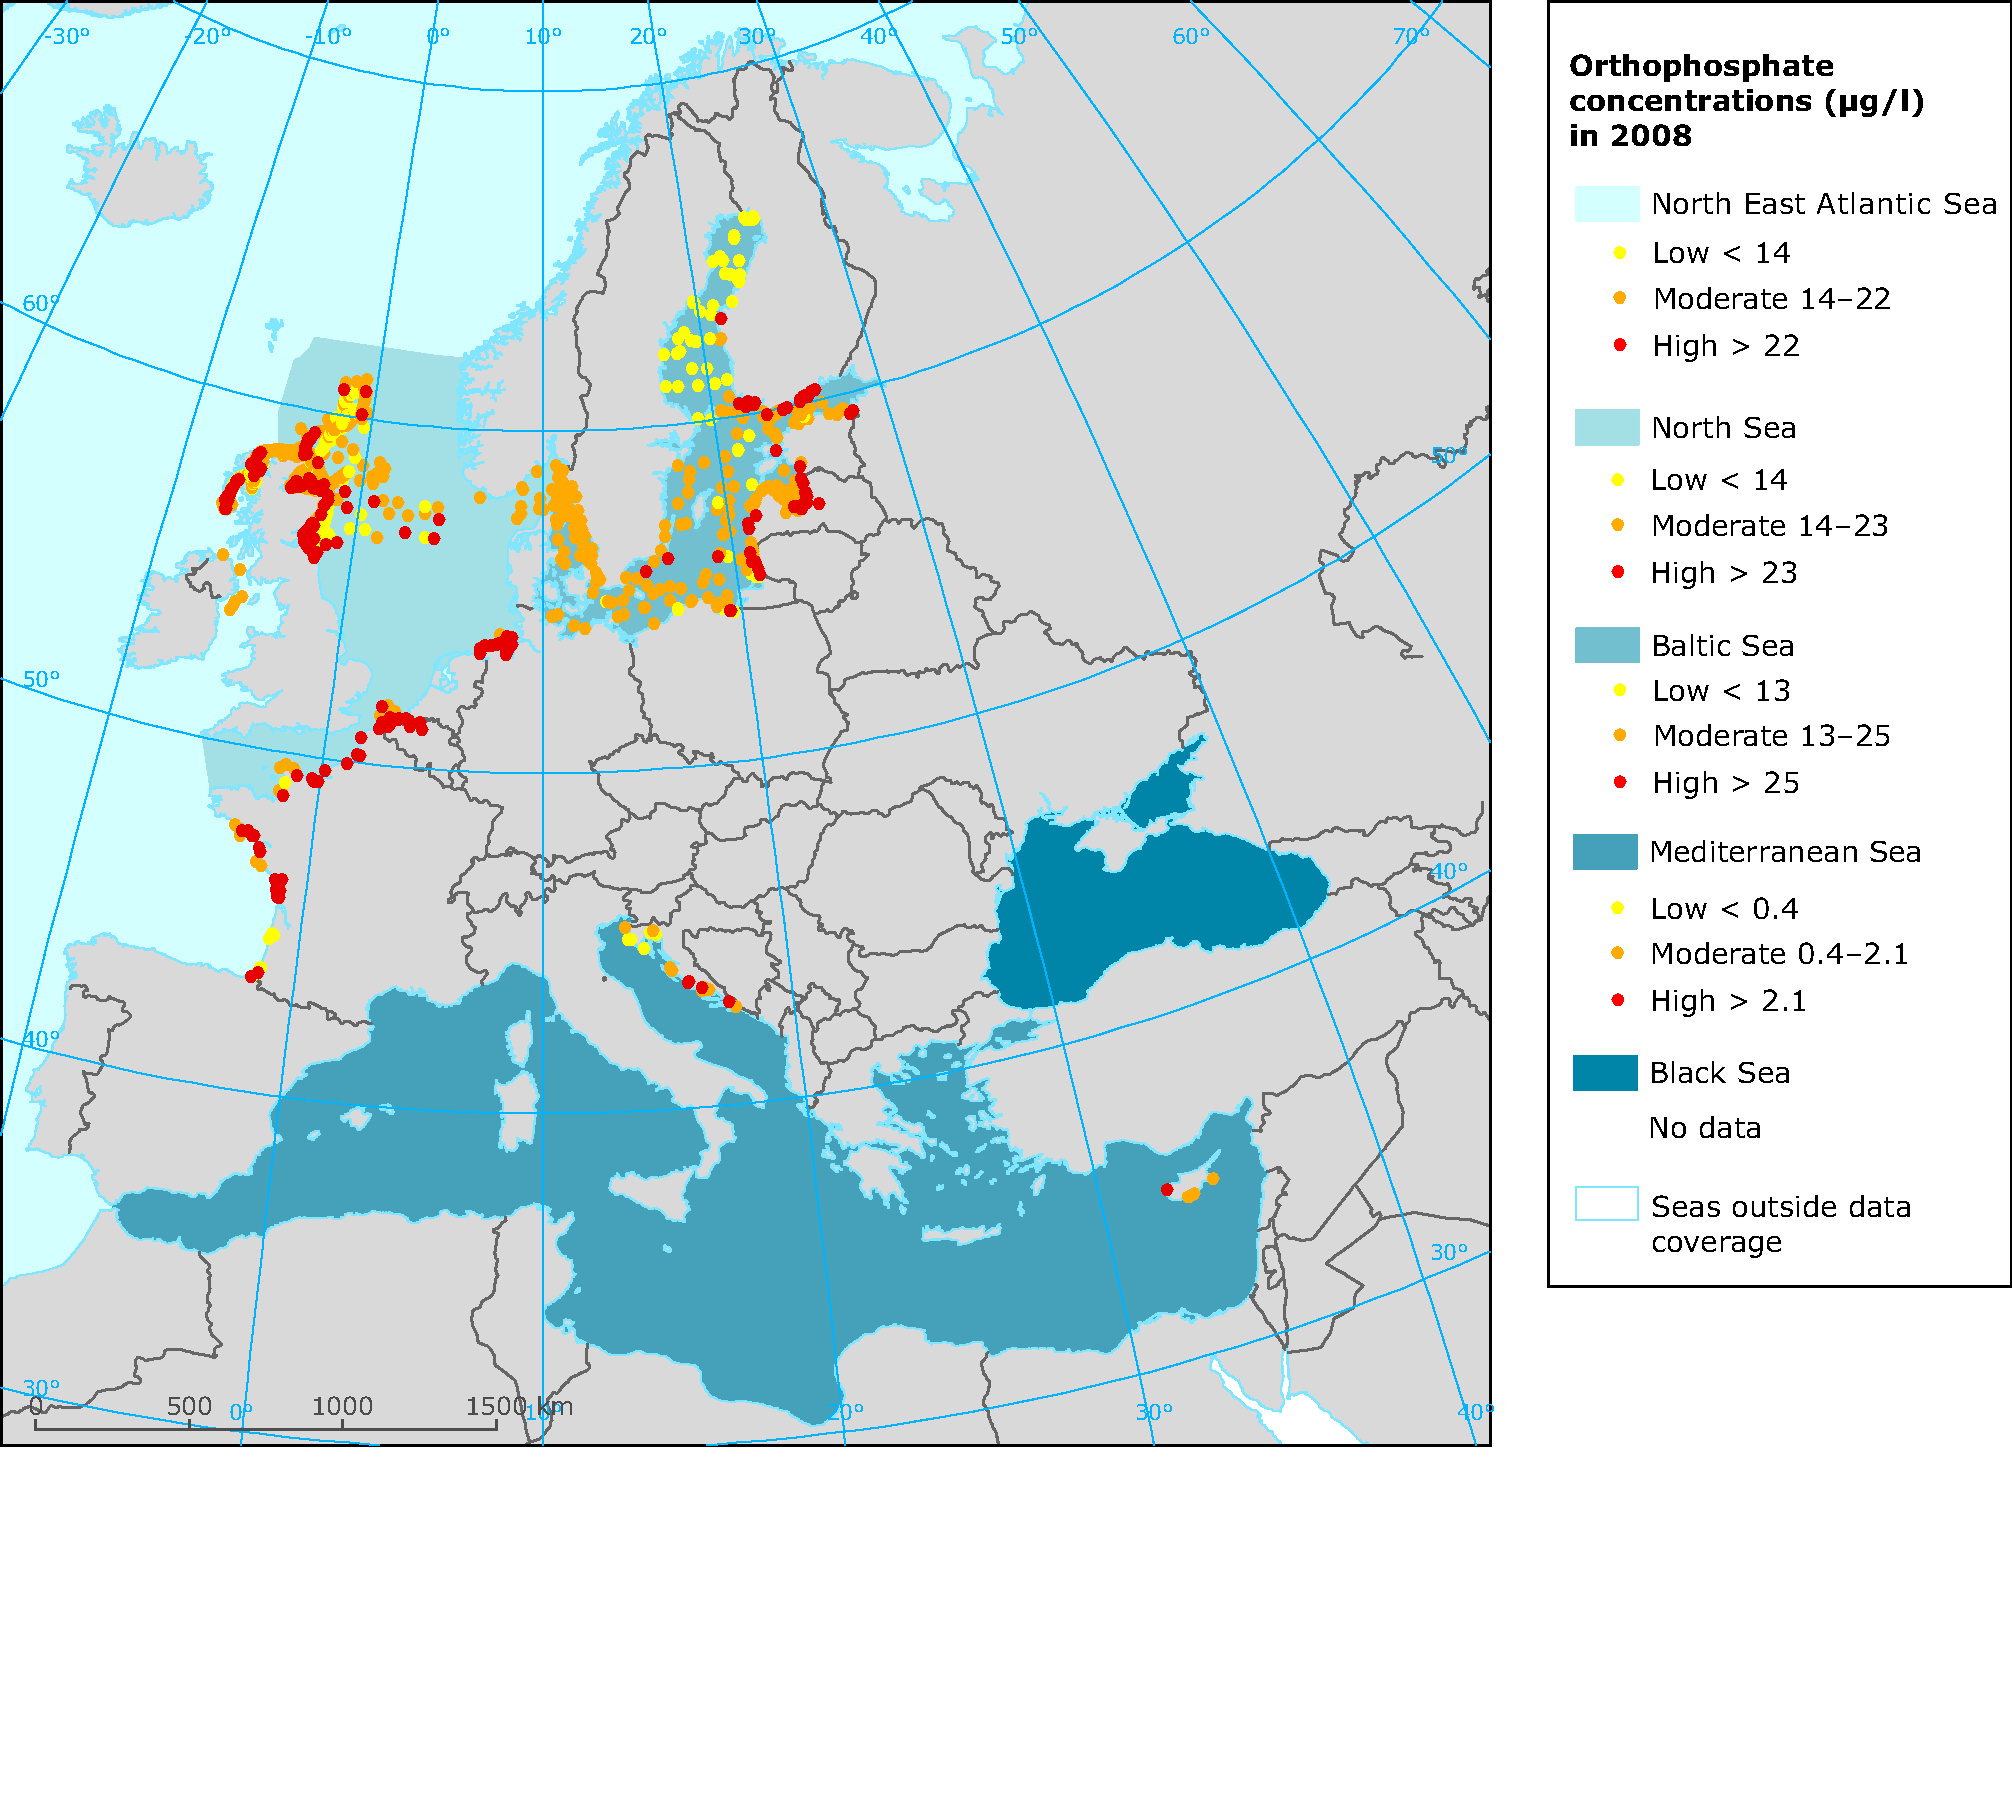 Winter orthophosphate concentrations in European seas in 2008